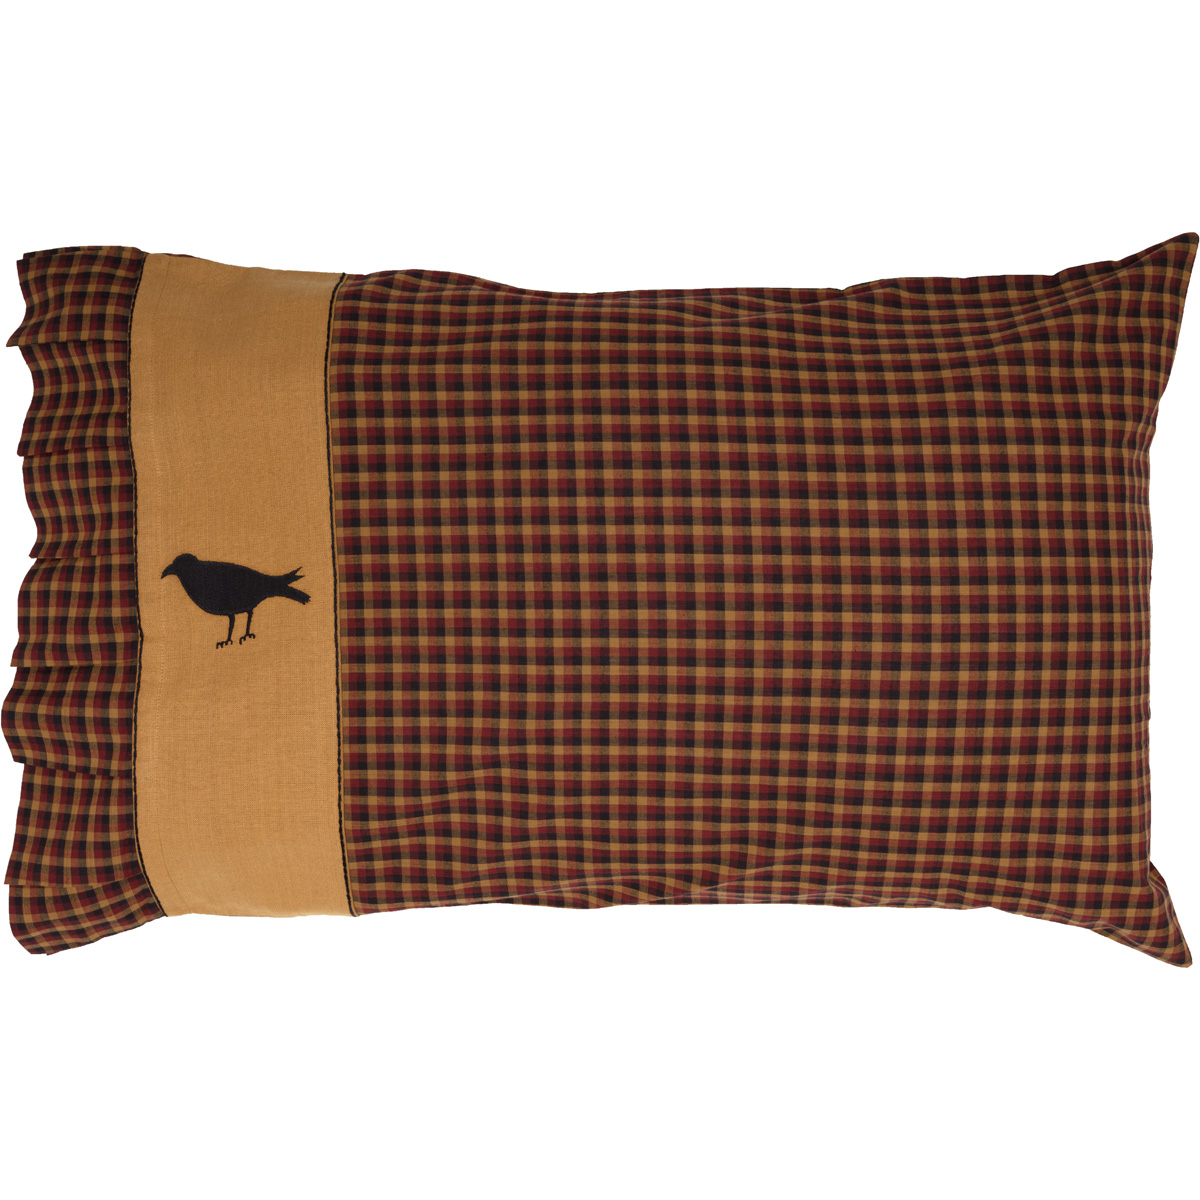 Heritage Farms Crow Standard Pillow Case Set of 2 21x30